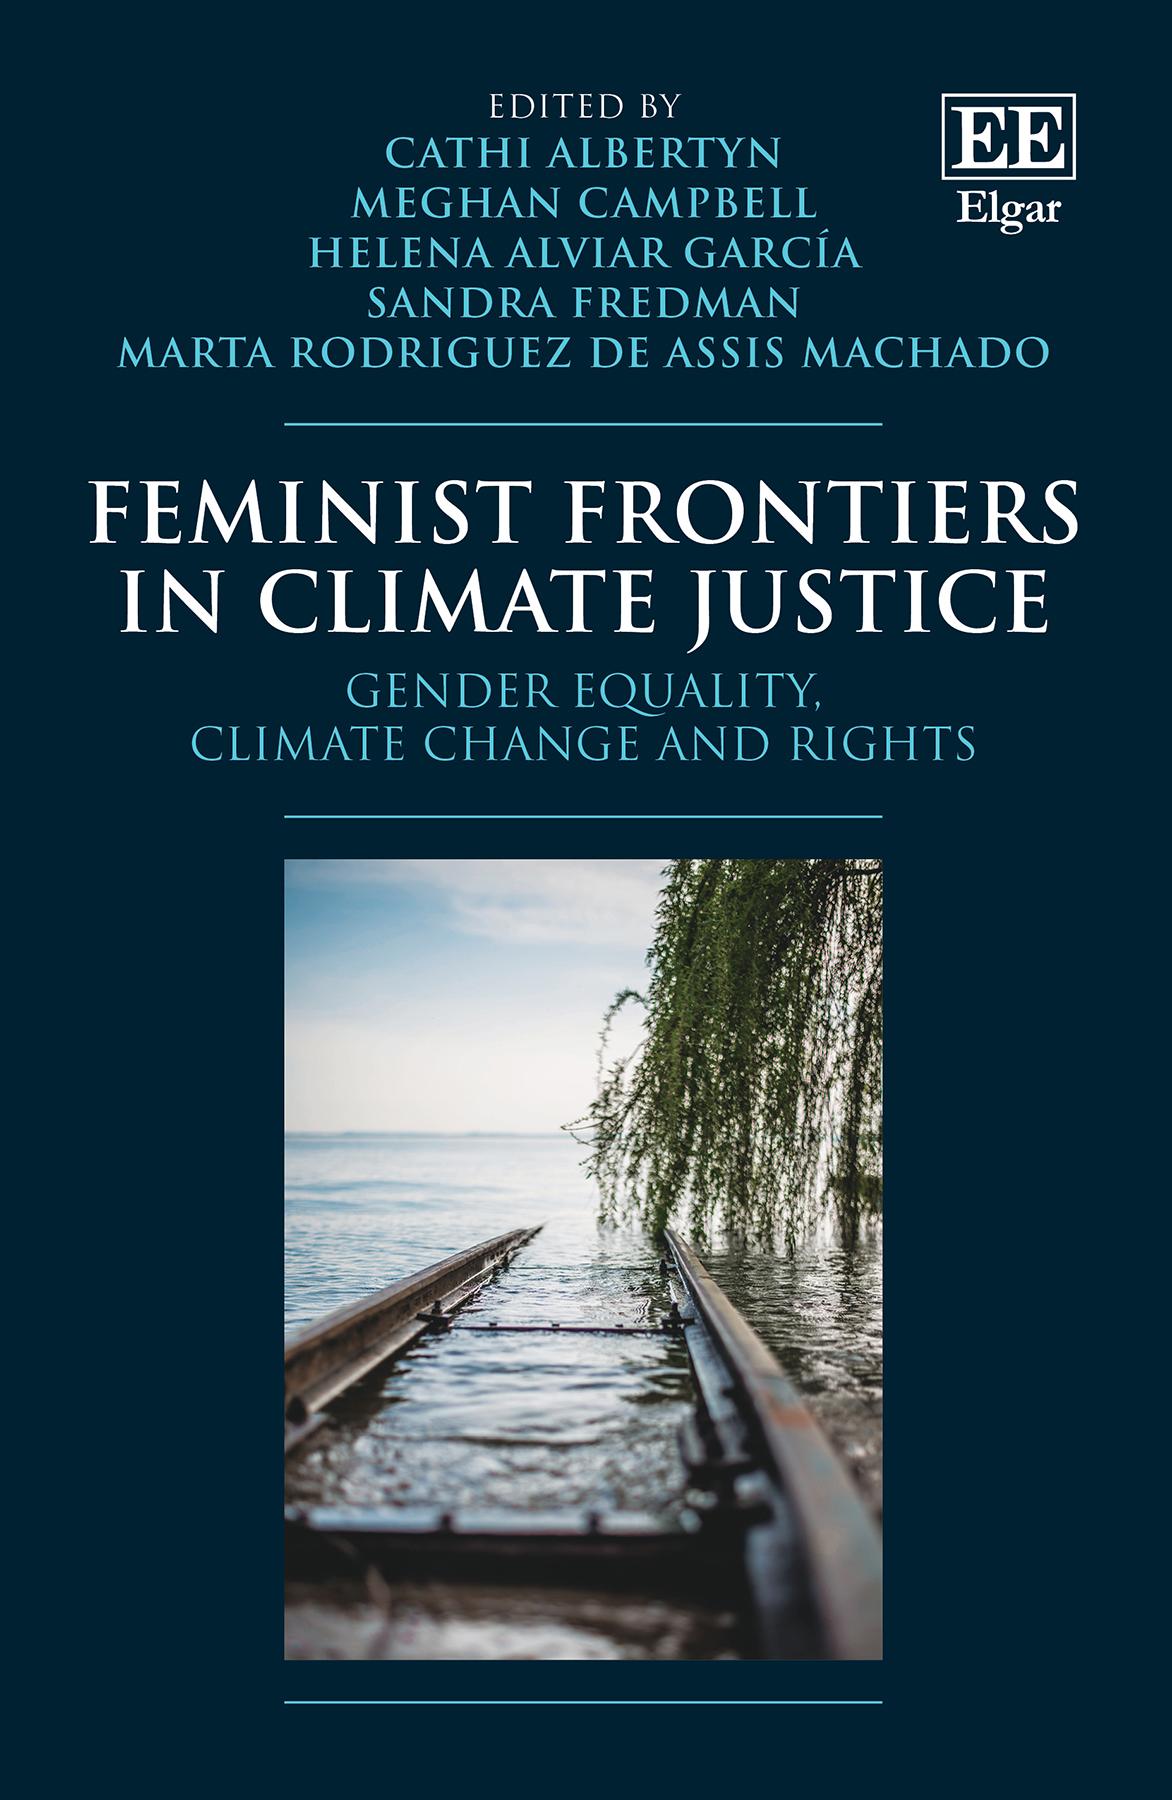 Cover of Feminist Frontiers in Climate Justice which features a picture of a flooded set of train tracks